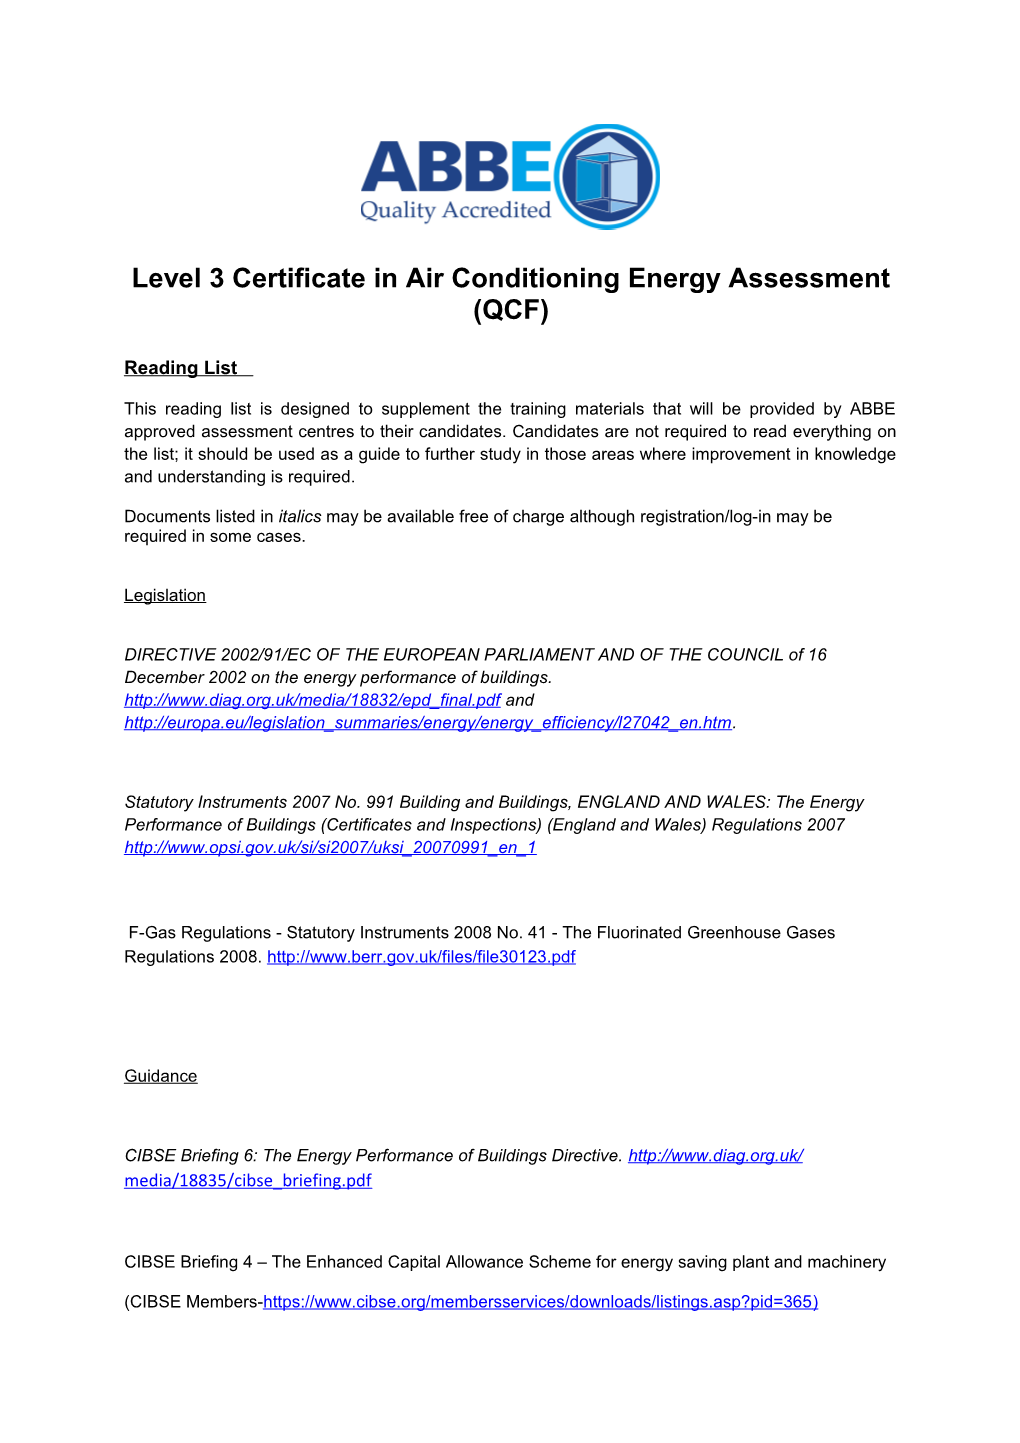 Level 3 Certificate in Air Conditioning Energy Assessment(QCF)